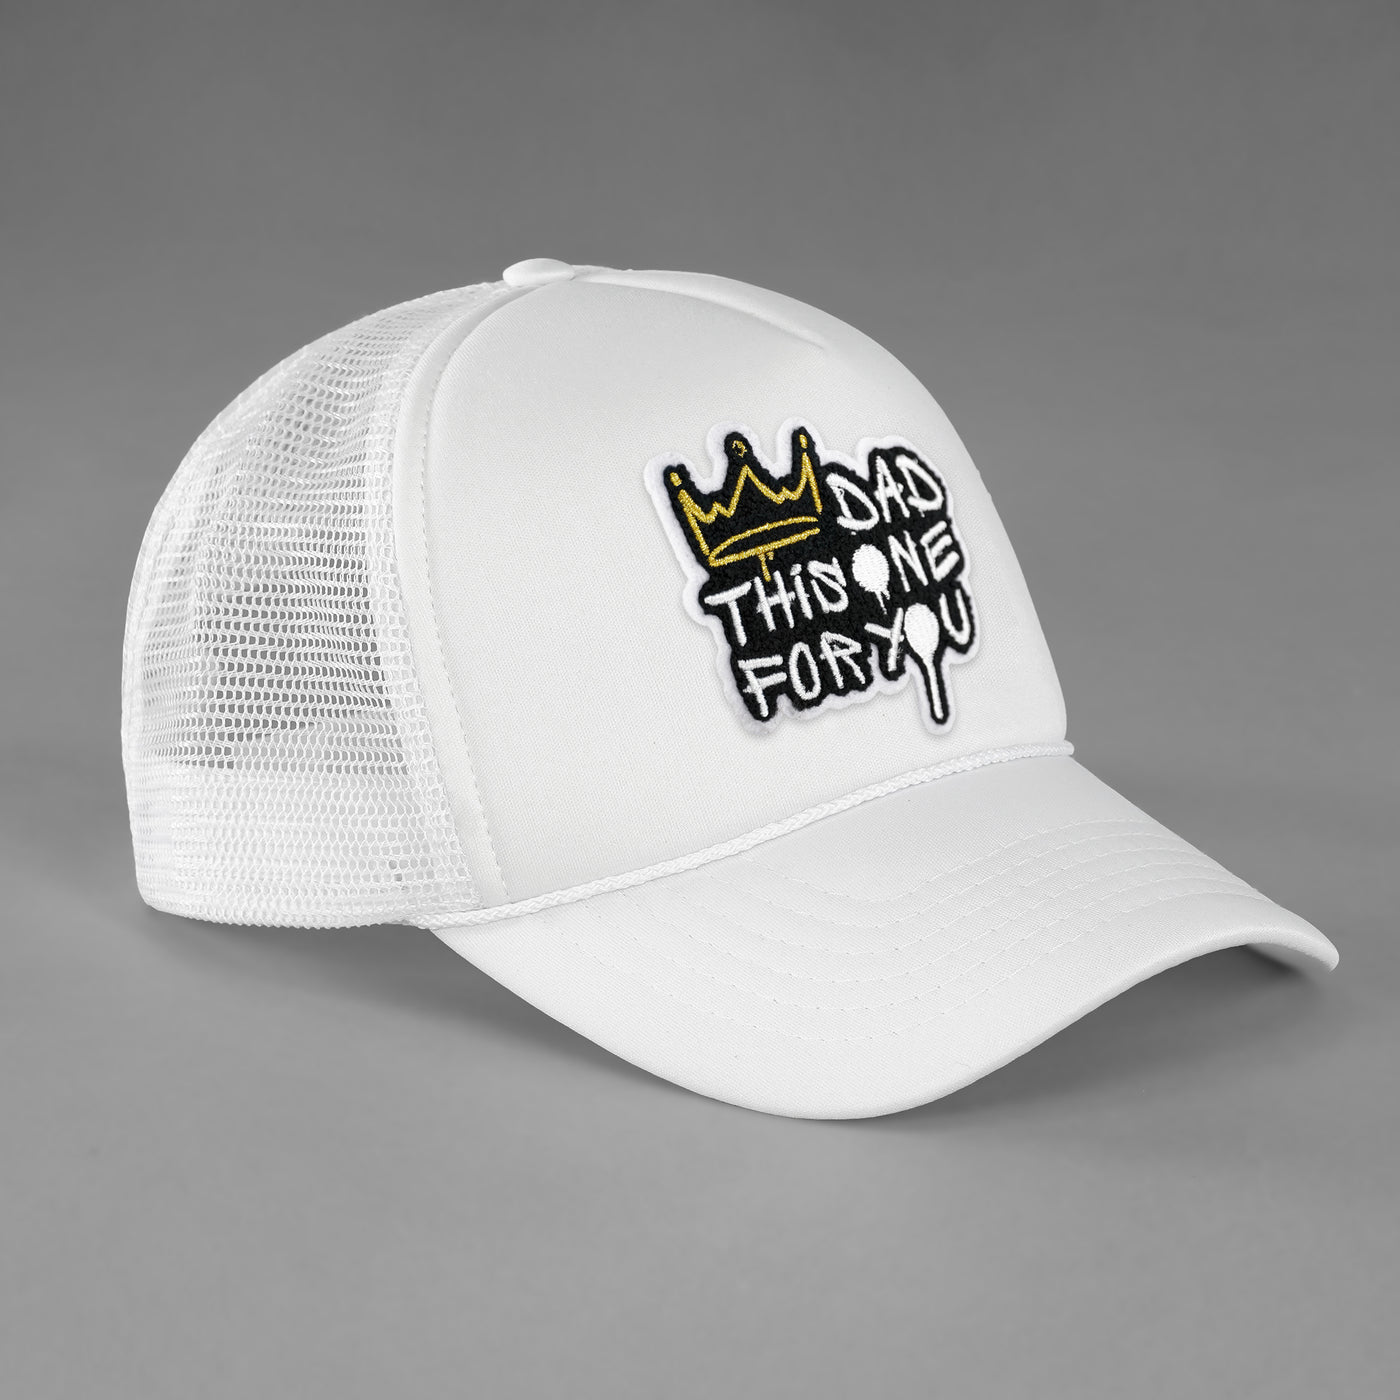 Dad This One For You White Trucker Hat